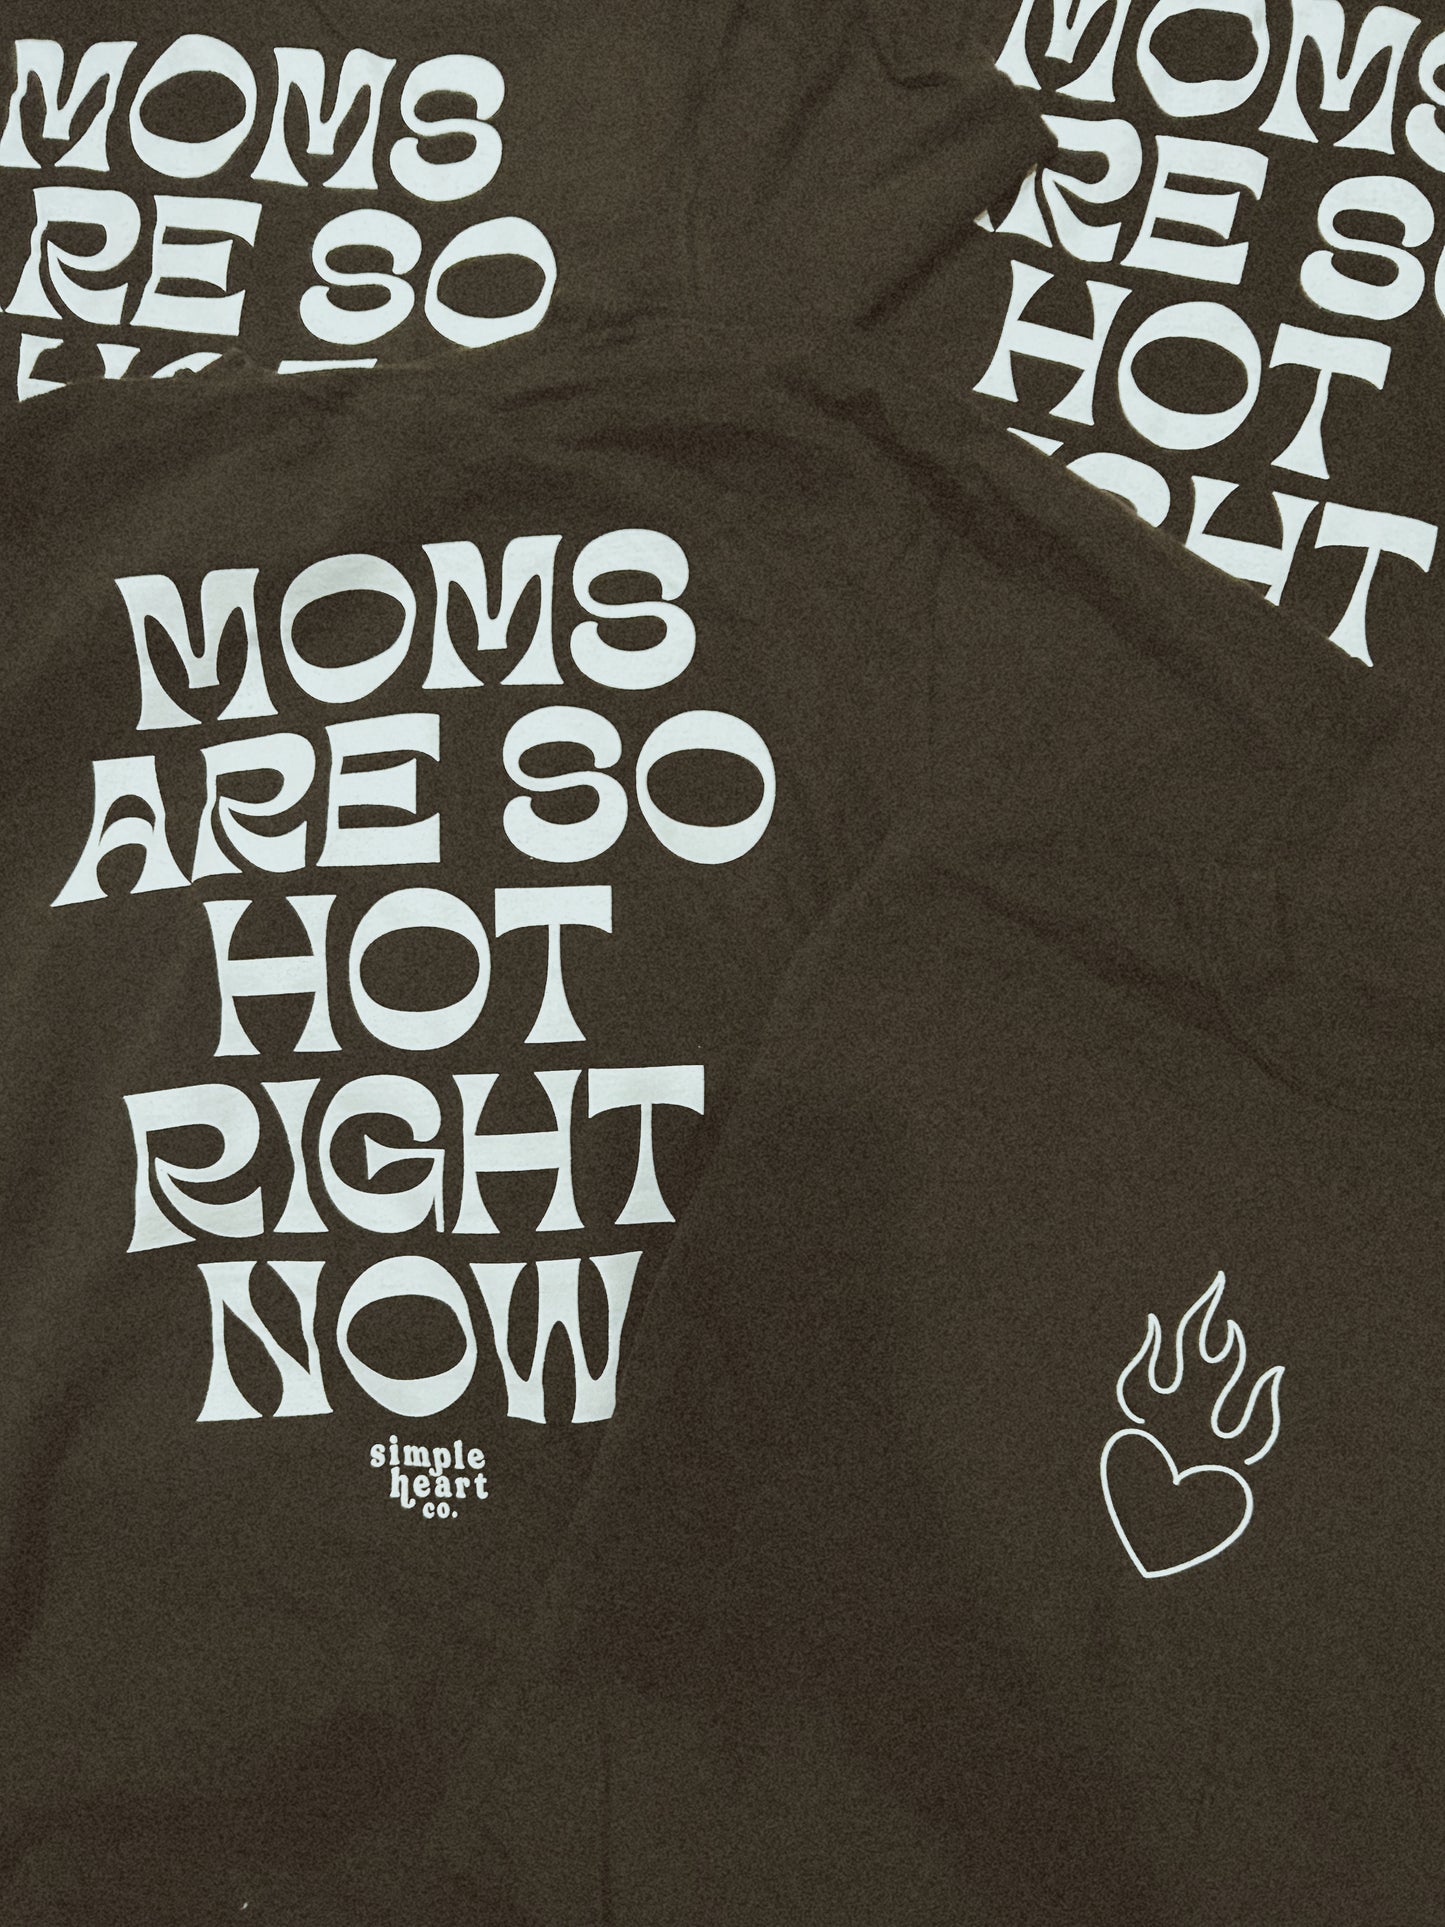 Moms are so hot tee